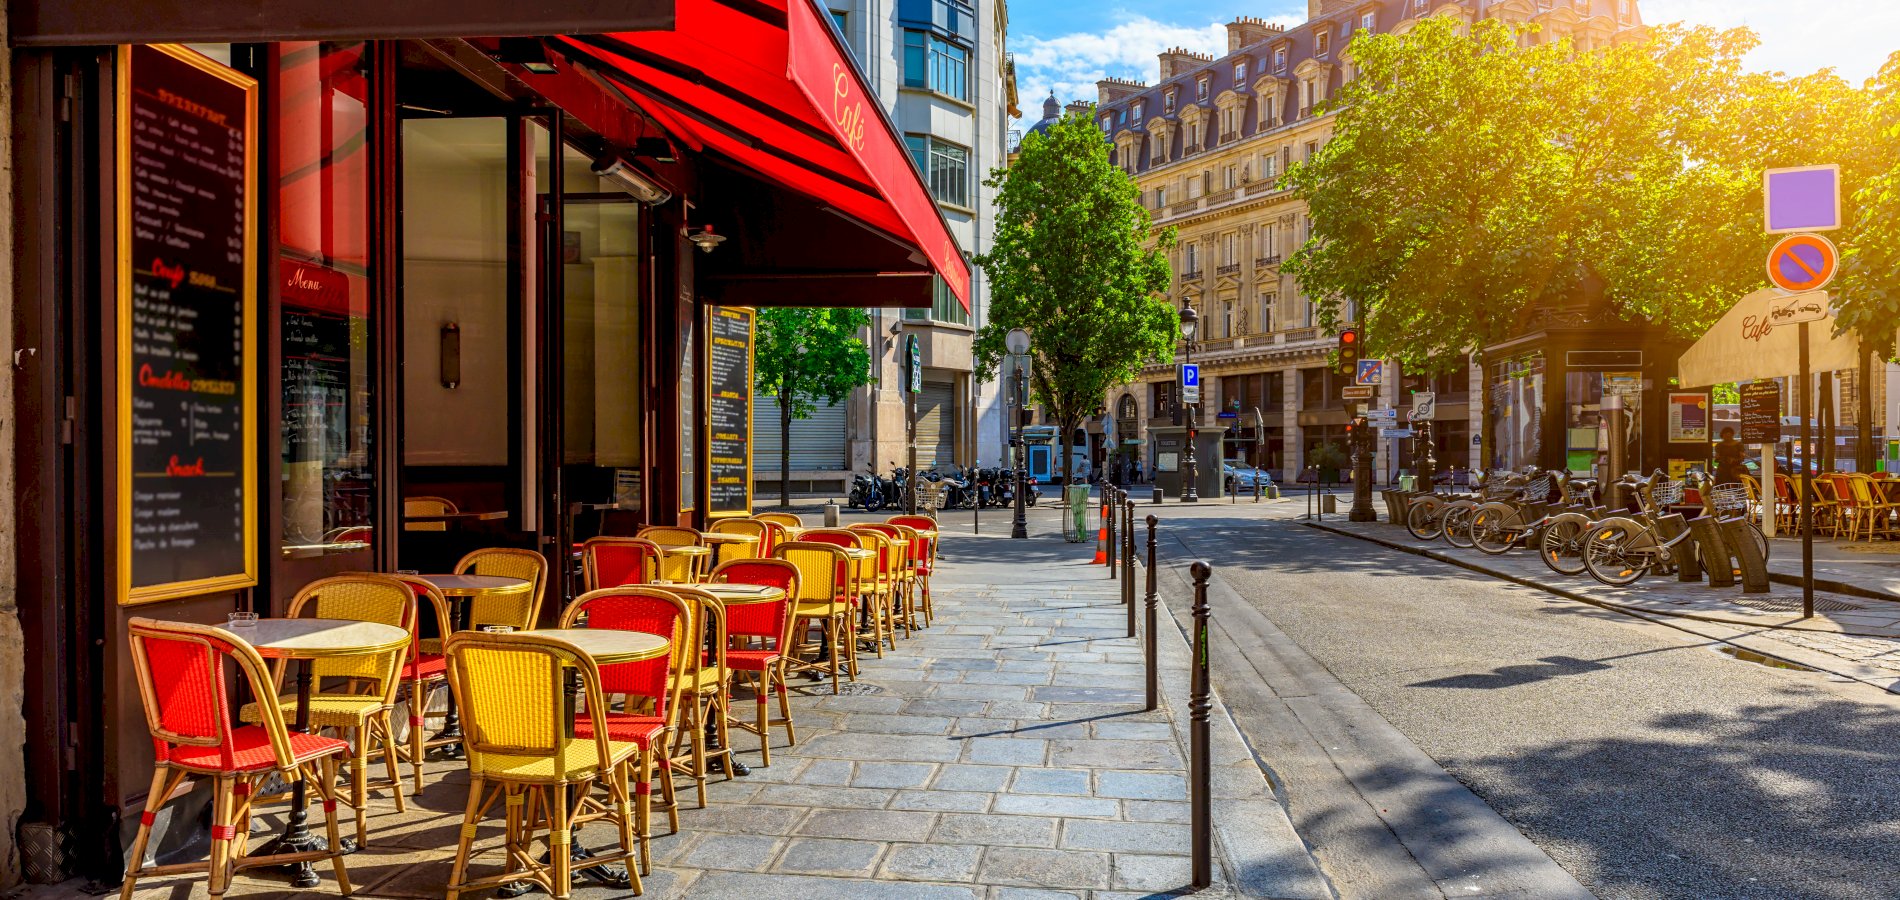 Ophorus Tours - 9 Days Small Group Paris, Normandy & Loire Valley Package - 4* Hotel